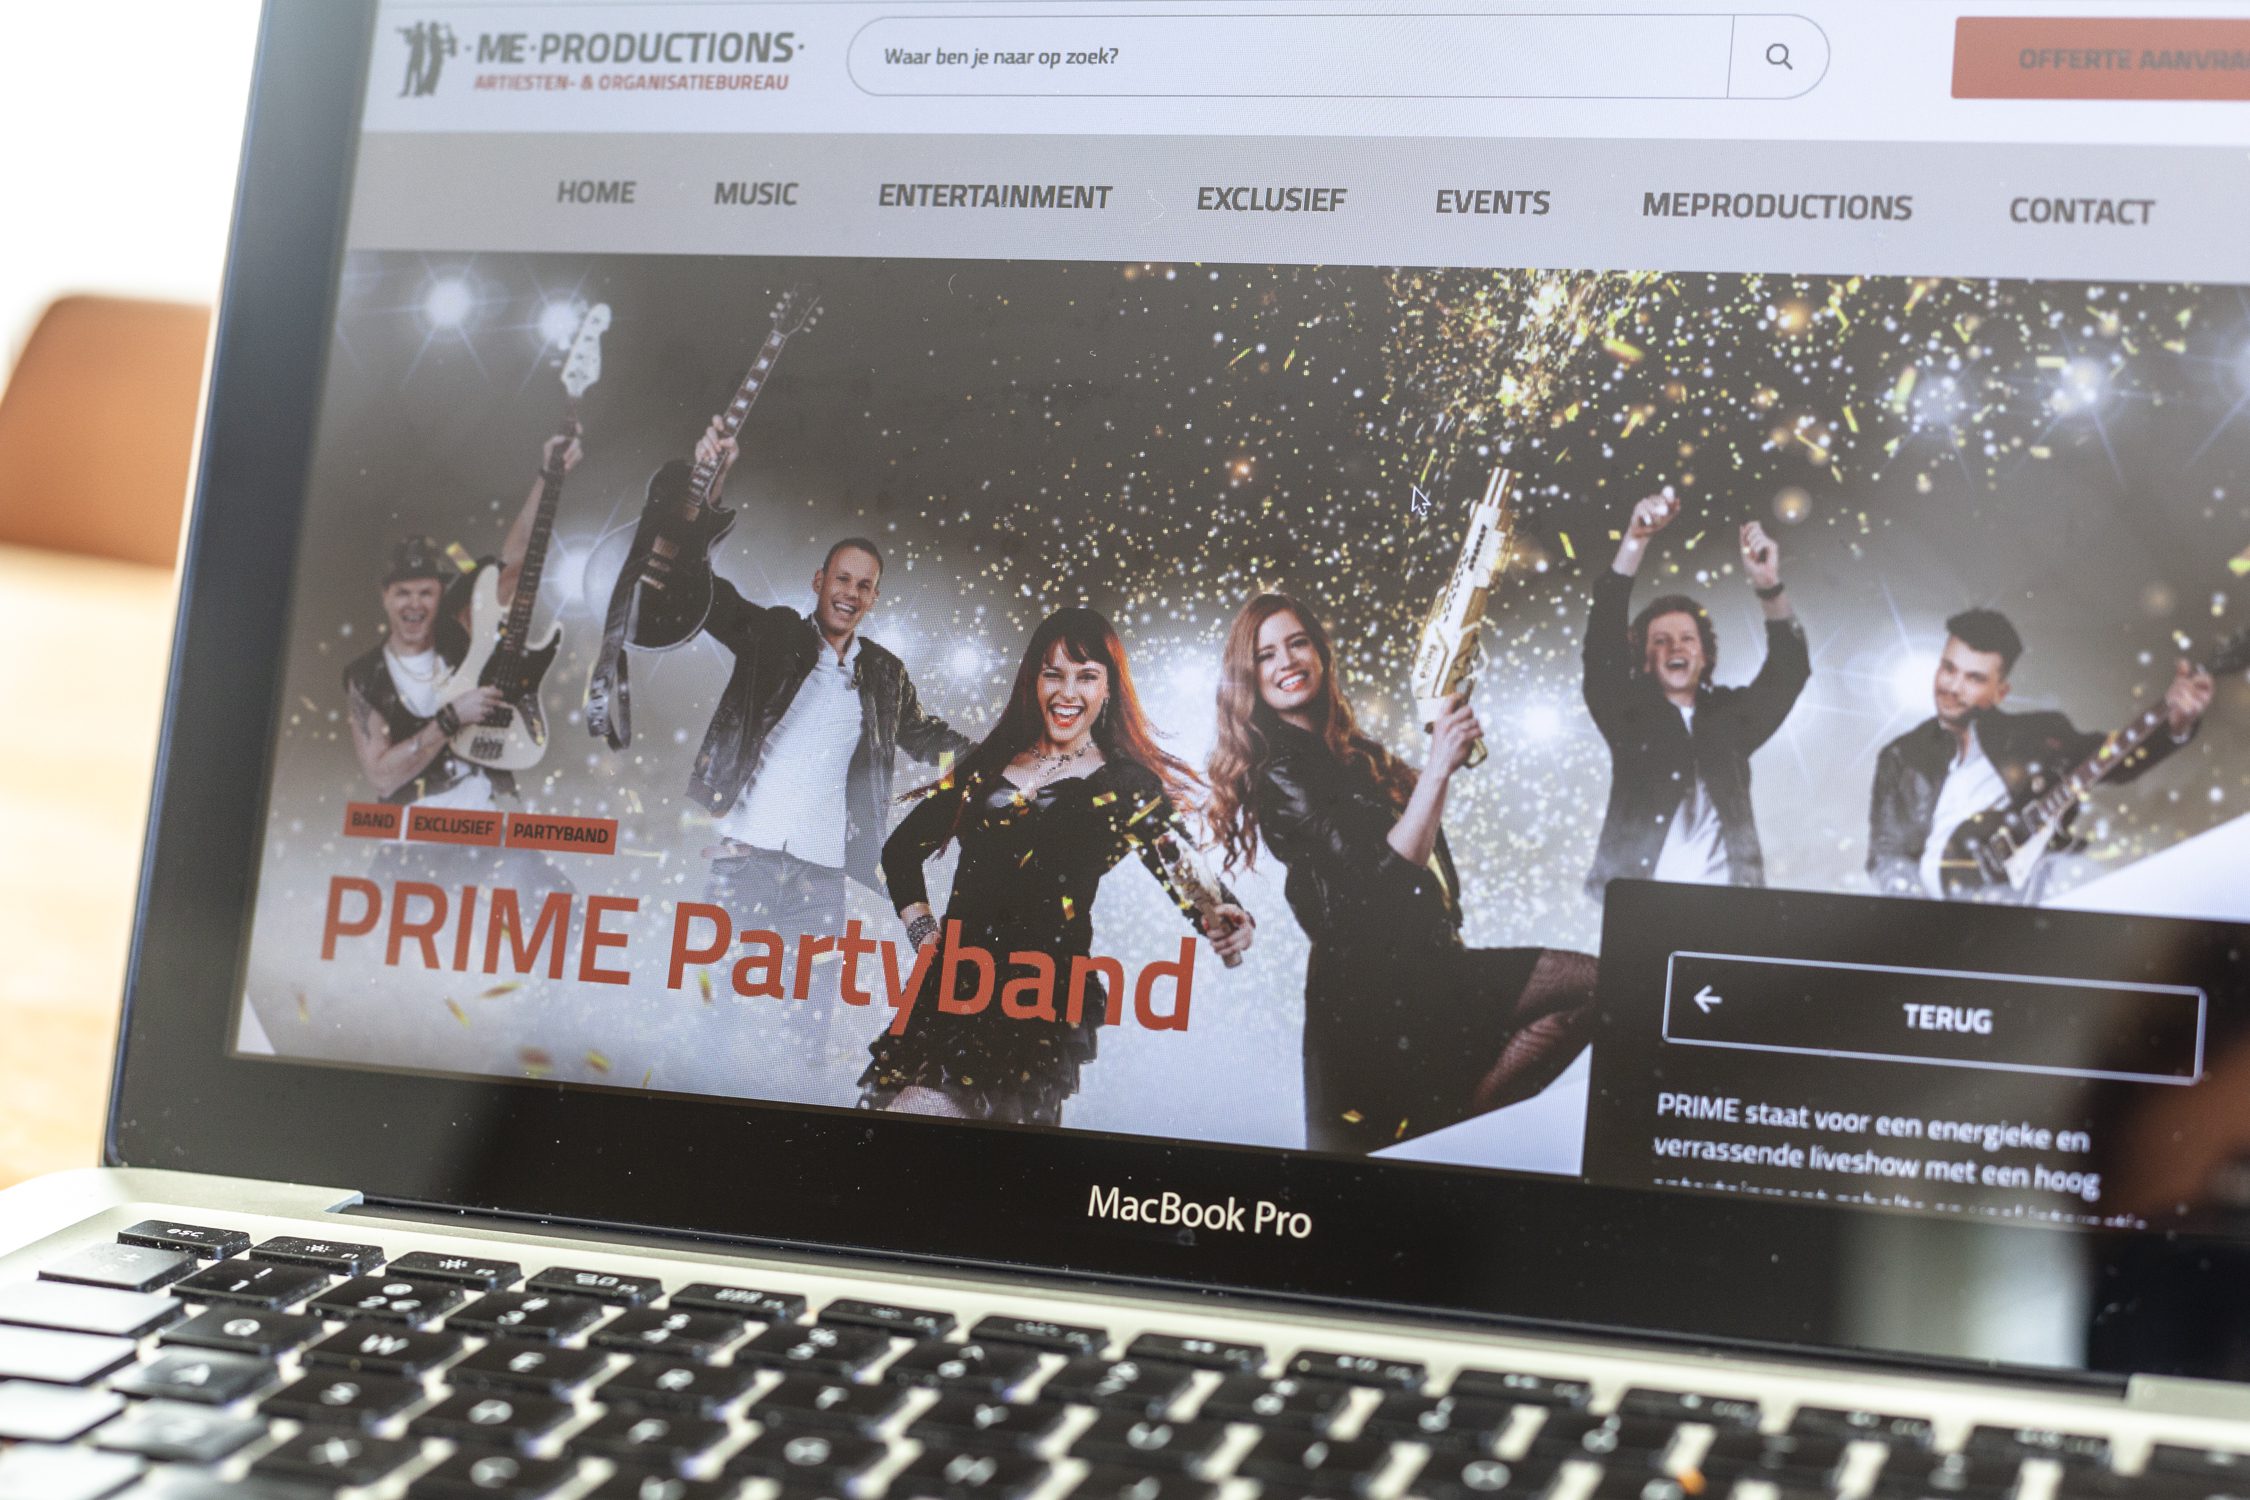 Prime Partyband Meproductions